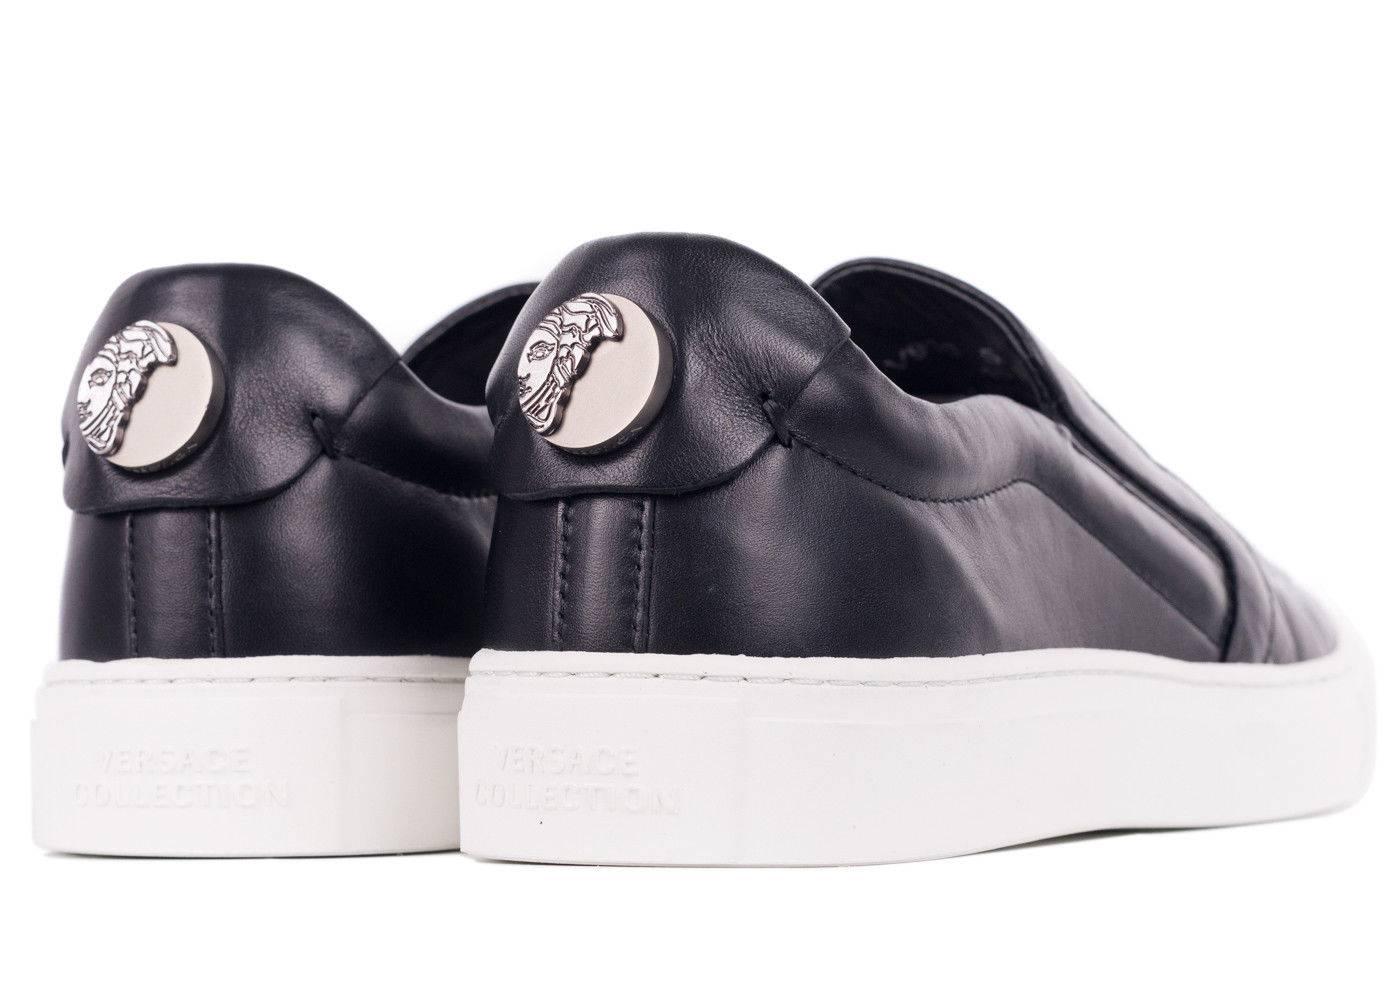 Walk amongst the stars in your Versace Collection Engraved Sneakers. These slip on sneakers  are very easy to wear and display luxury craftmanship. They feature an engraved star motif with concealed elastic bands and trendy white rubber soles for